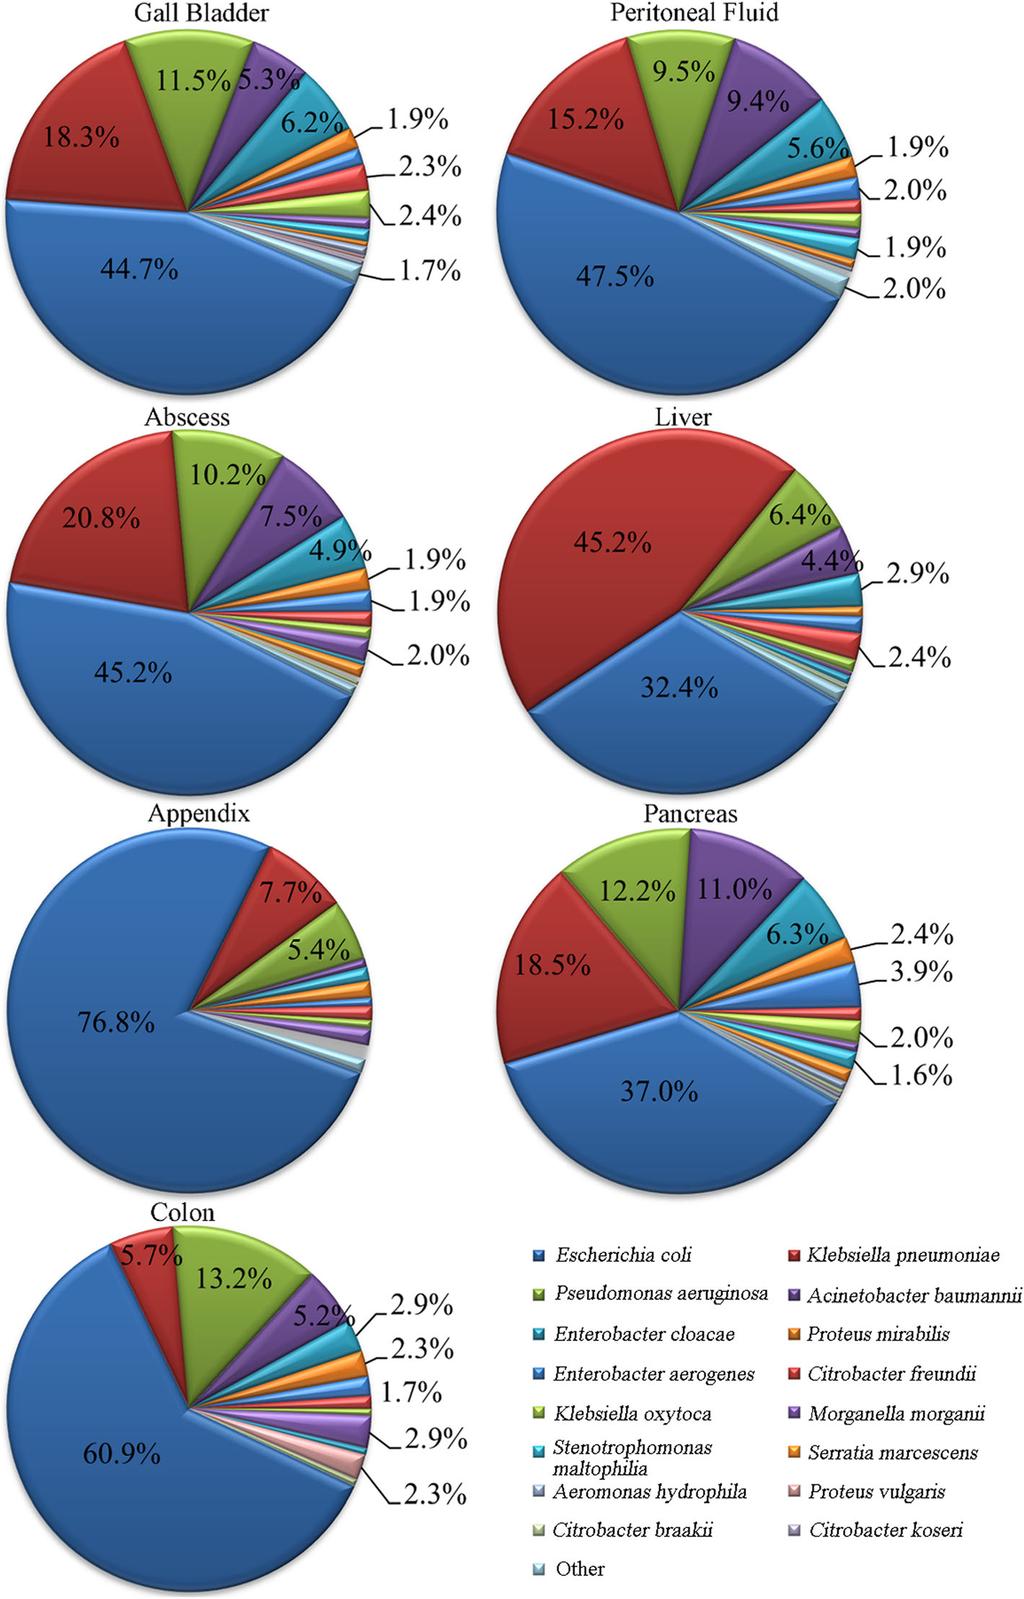 Liu and Ni BMC Infectious Diseases (2018) 18:584 Page 4 of 7 Fig. 1 Composition of pathogenic bacteria in infected abdominal organs from 2010 to 2014 percentage of A.